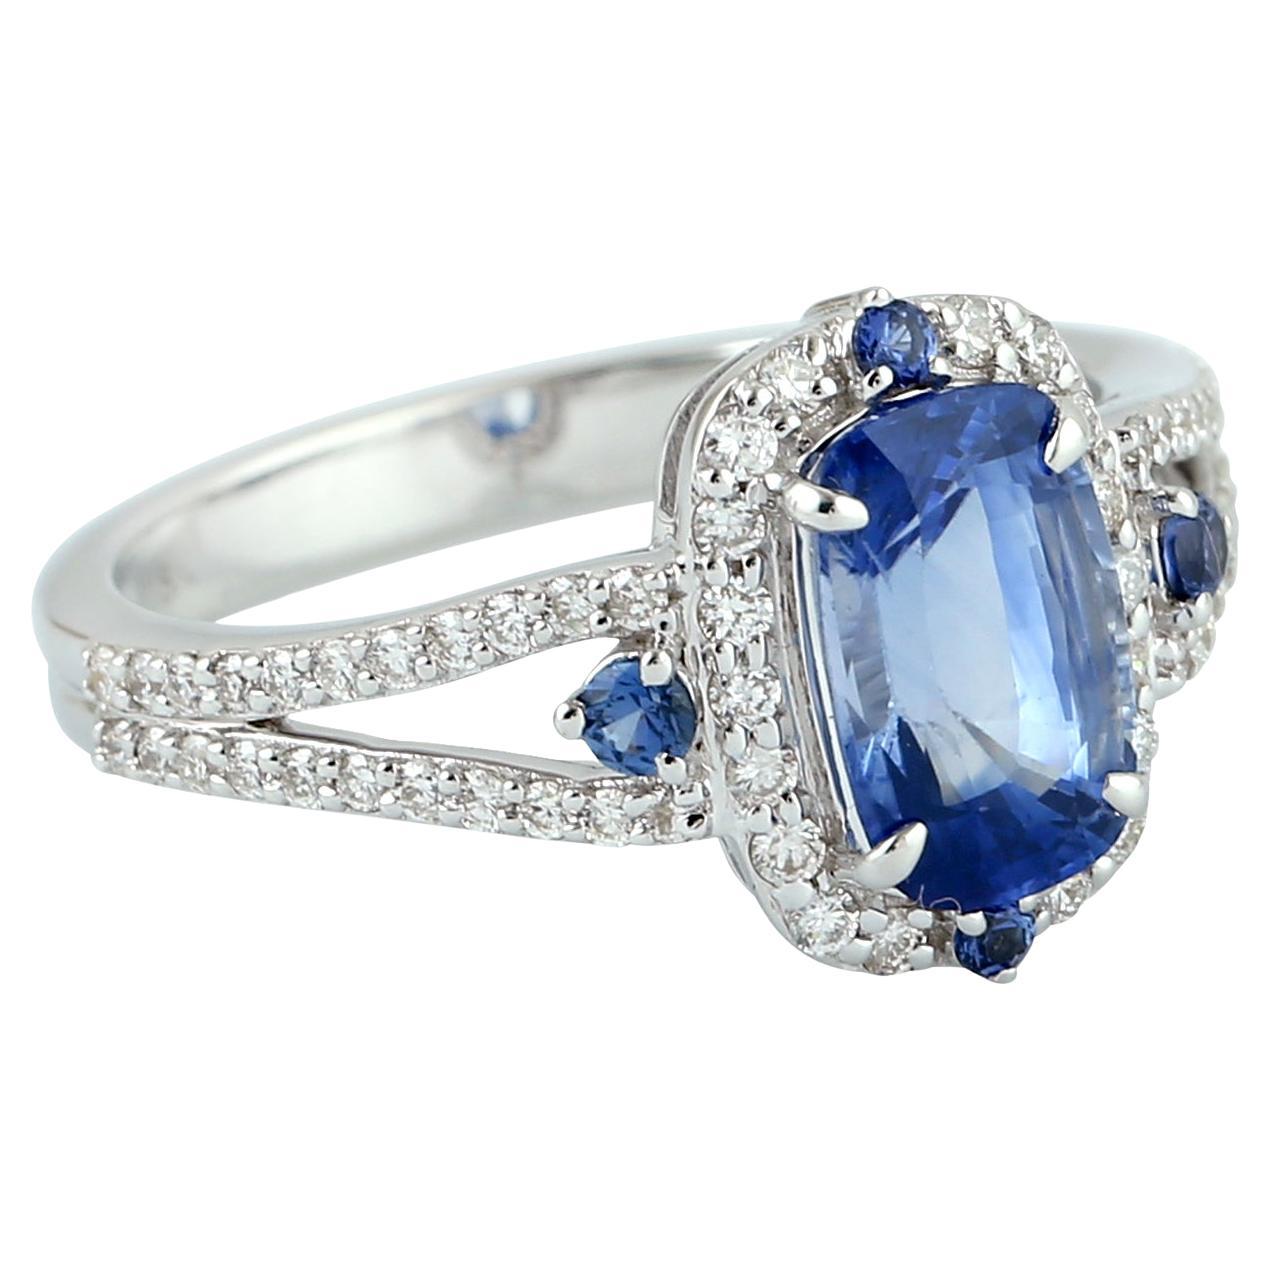 Blue Sapphire Cocktail Ring With Pave Diamonds Made In 18k White Gold For Sale